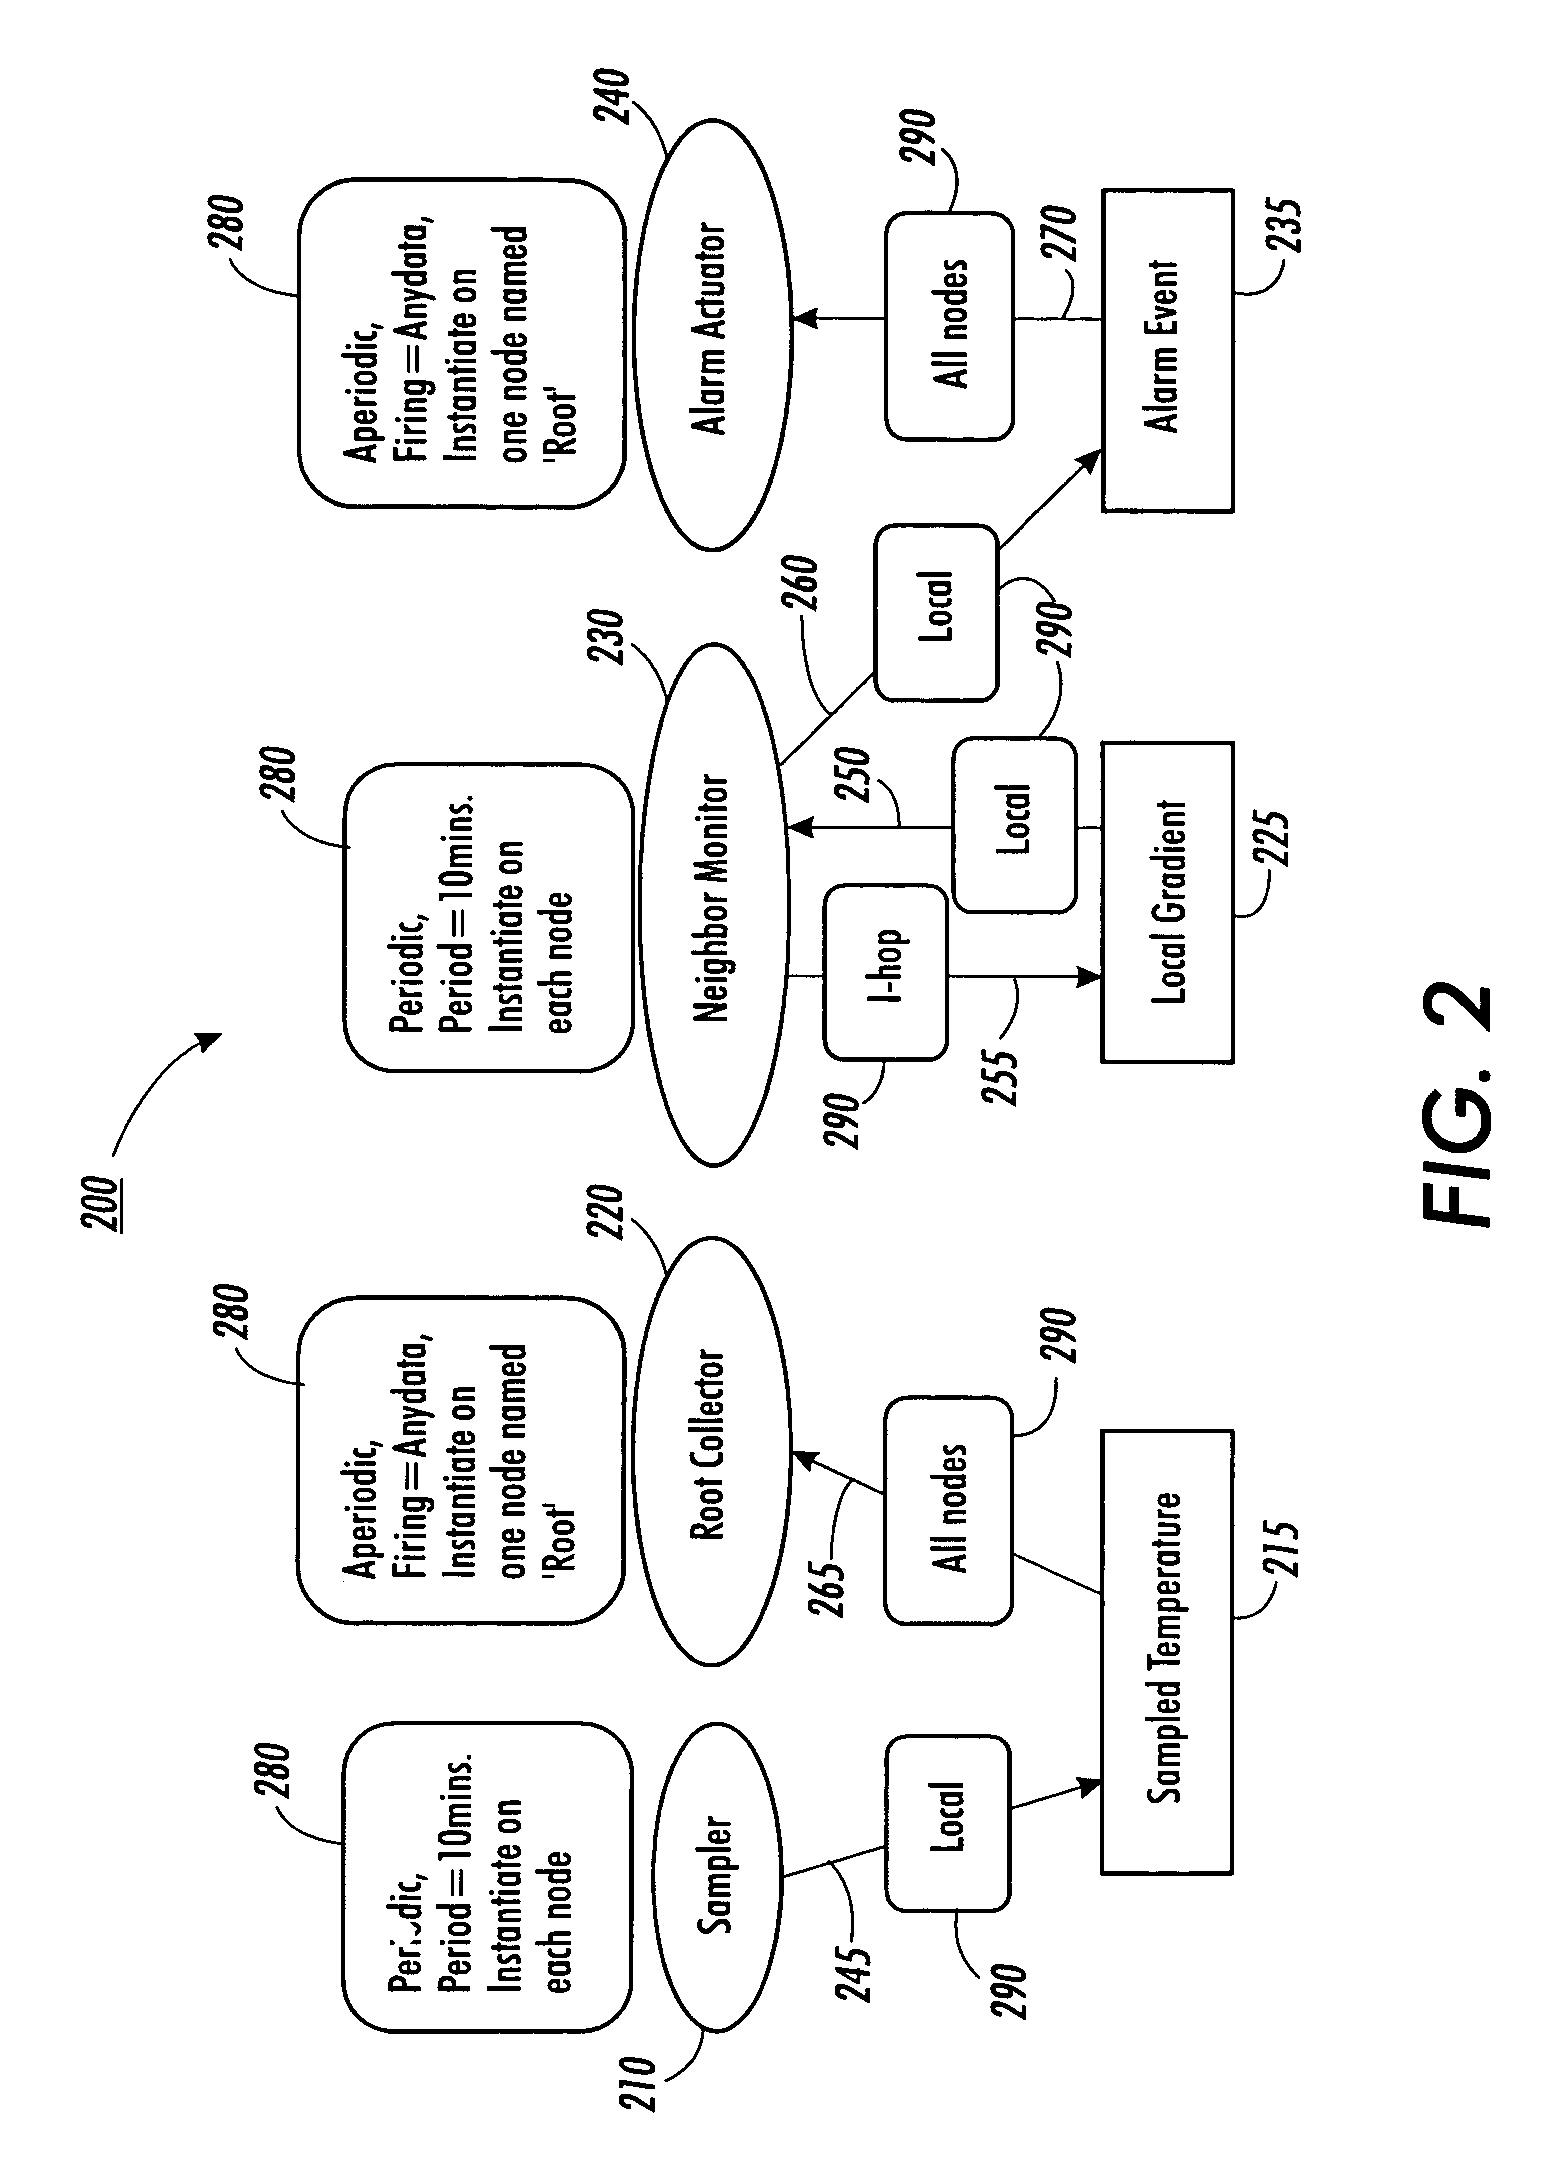 Systems and methods for architecture independent programming and synthesis of network applications